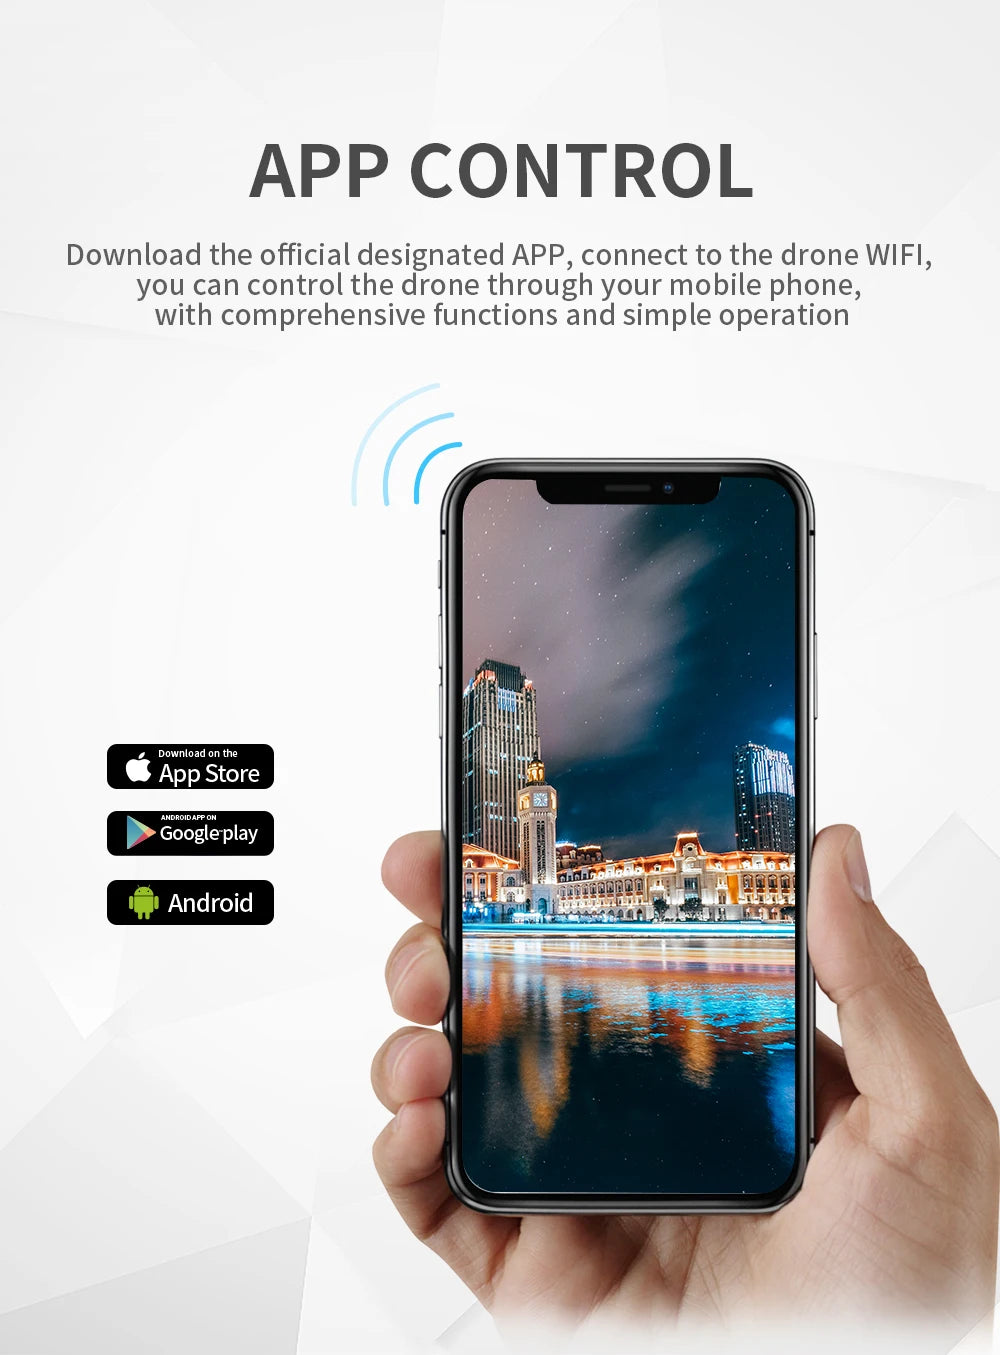 G108 Pro MAx Drone, Download the official designated APP, connect to the drone WIFI, you can control the drone